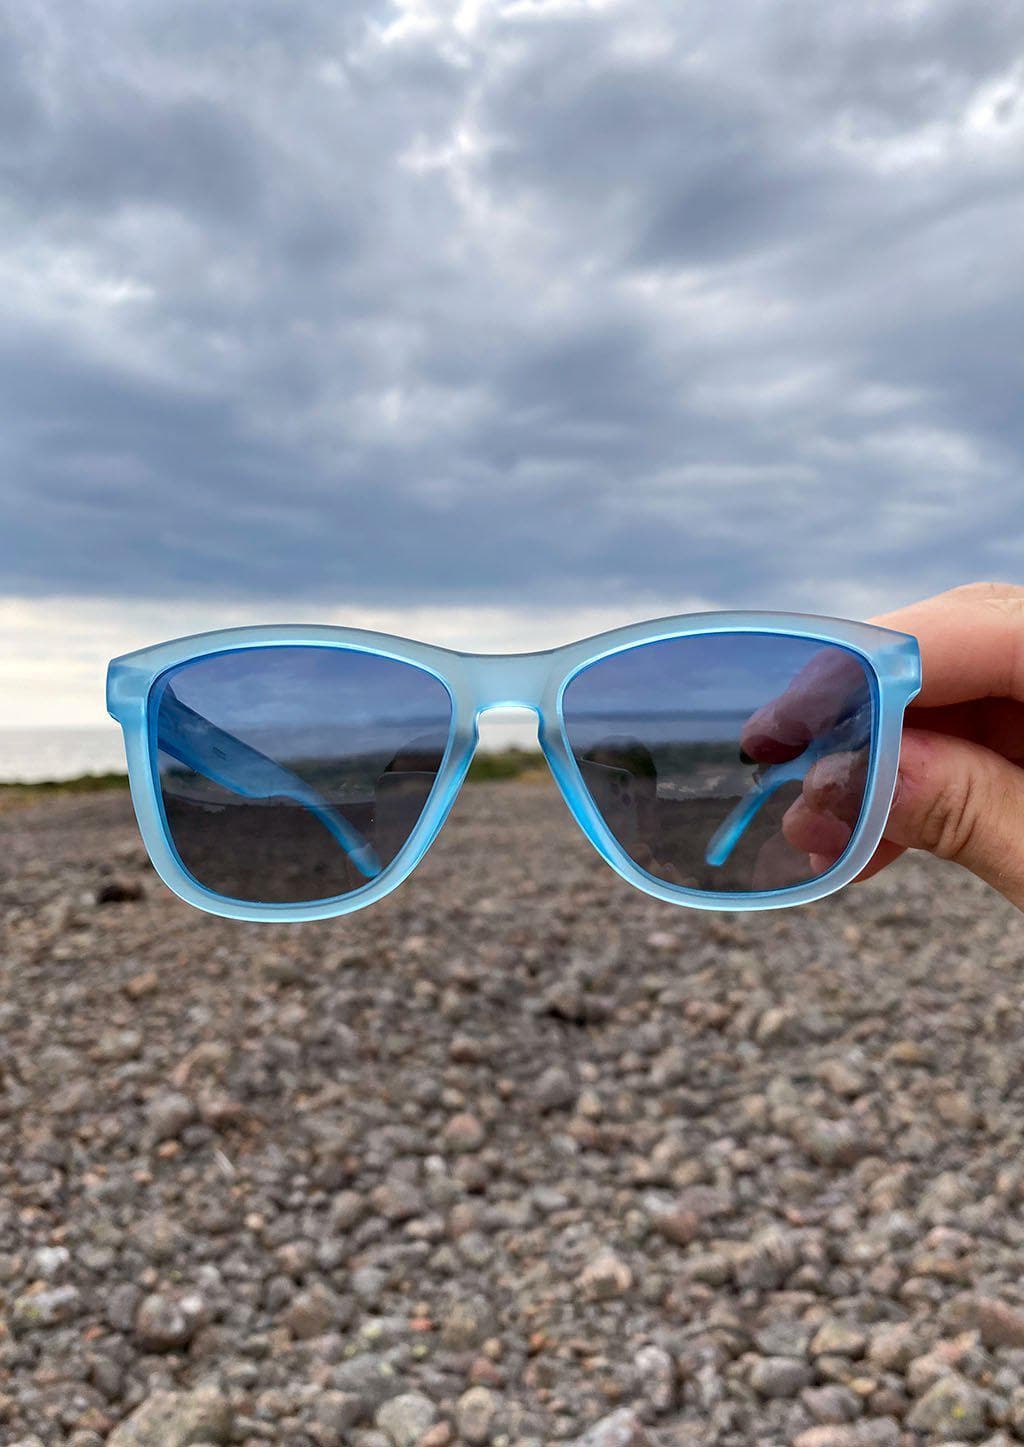 Our Mood V2 is an improved version of our last wayfarers. Plastic body for great quality and durabilty. This is Belize with blue frame and blue lenses. Outside from the front.